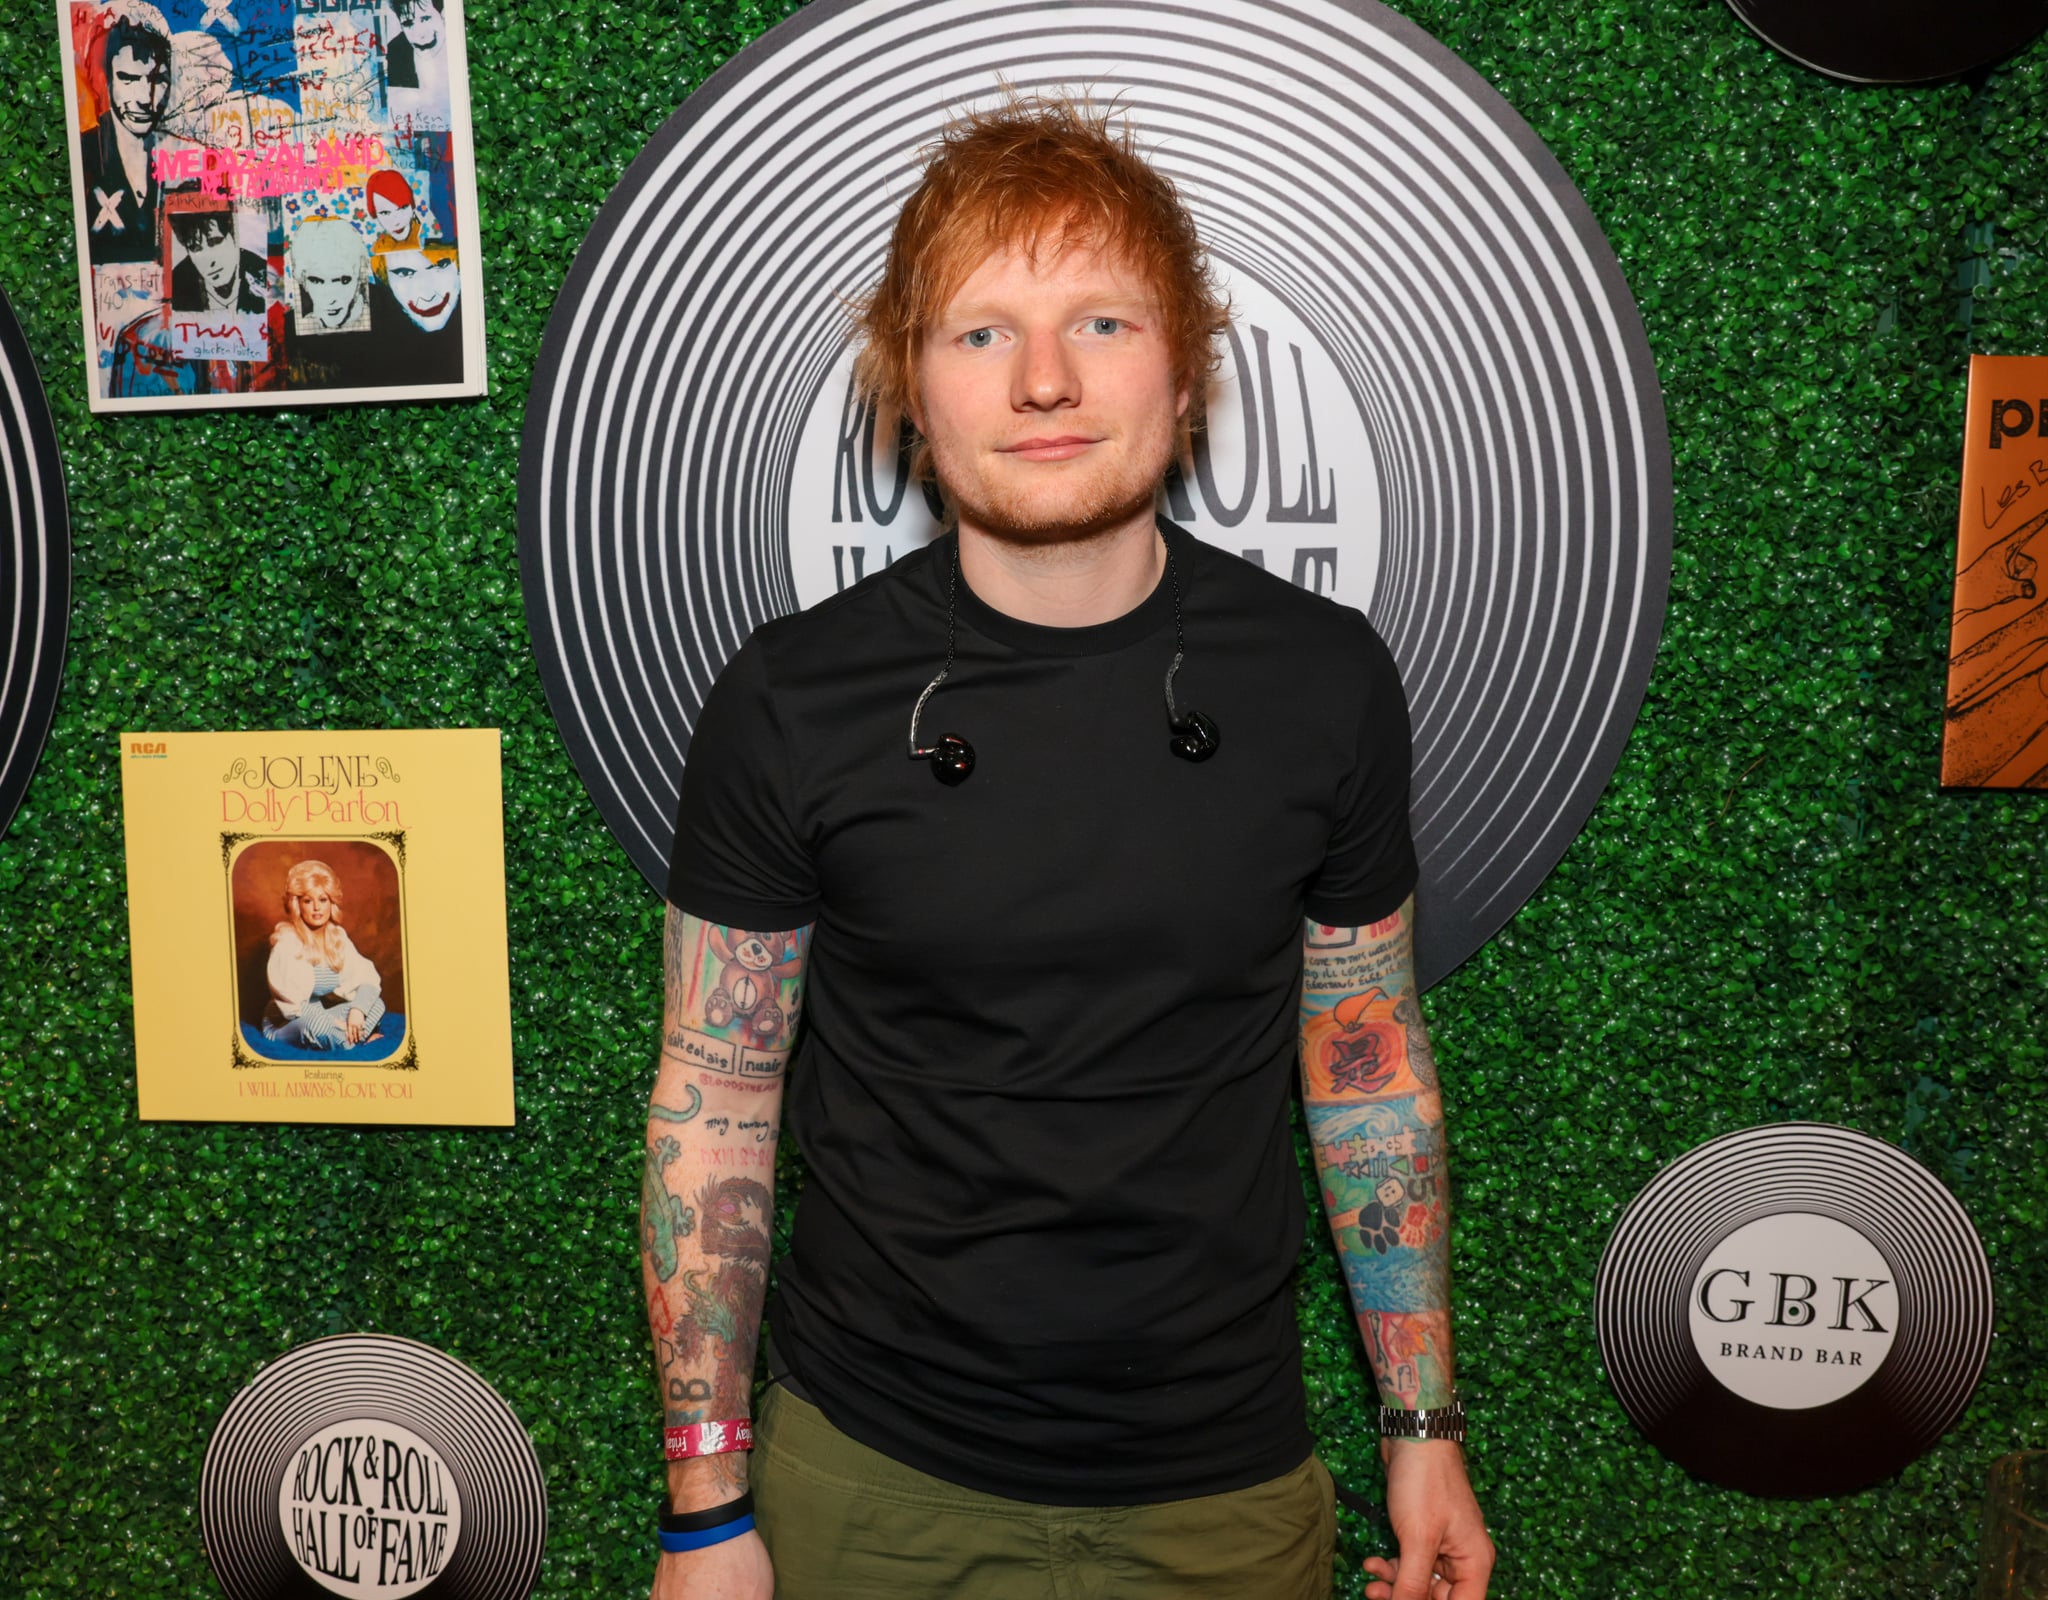 LOS ANGELES, CALIFORNIA - NOVEMBER 04: Ed Sheeran attends the GBK Brand Bar Back Stage during Rock & Roll Hall of Fame on November 04, 2022 in Los Angeles, California. (Photo by Tiffany Rose/Getty Images for GBK Brand Bar)